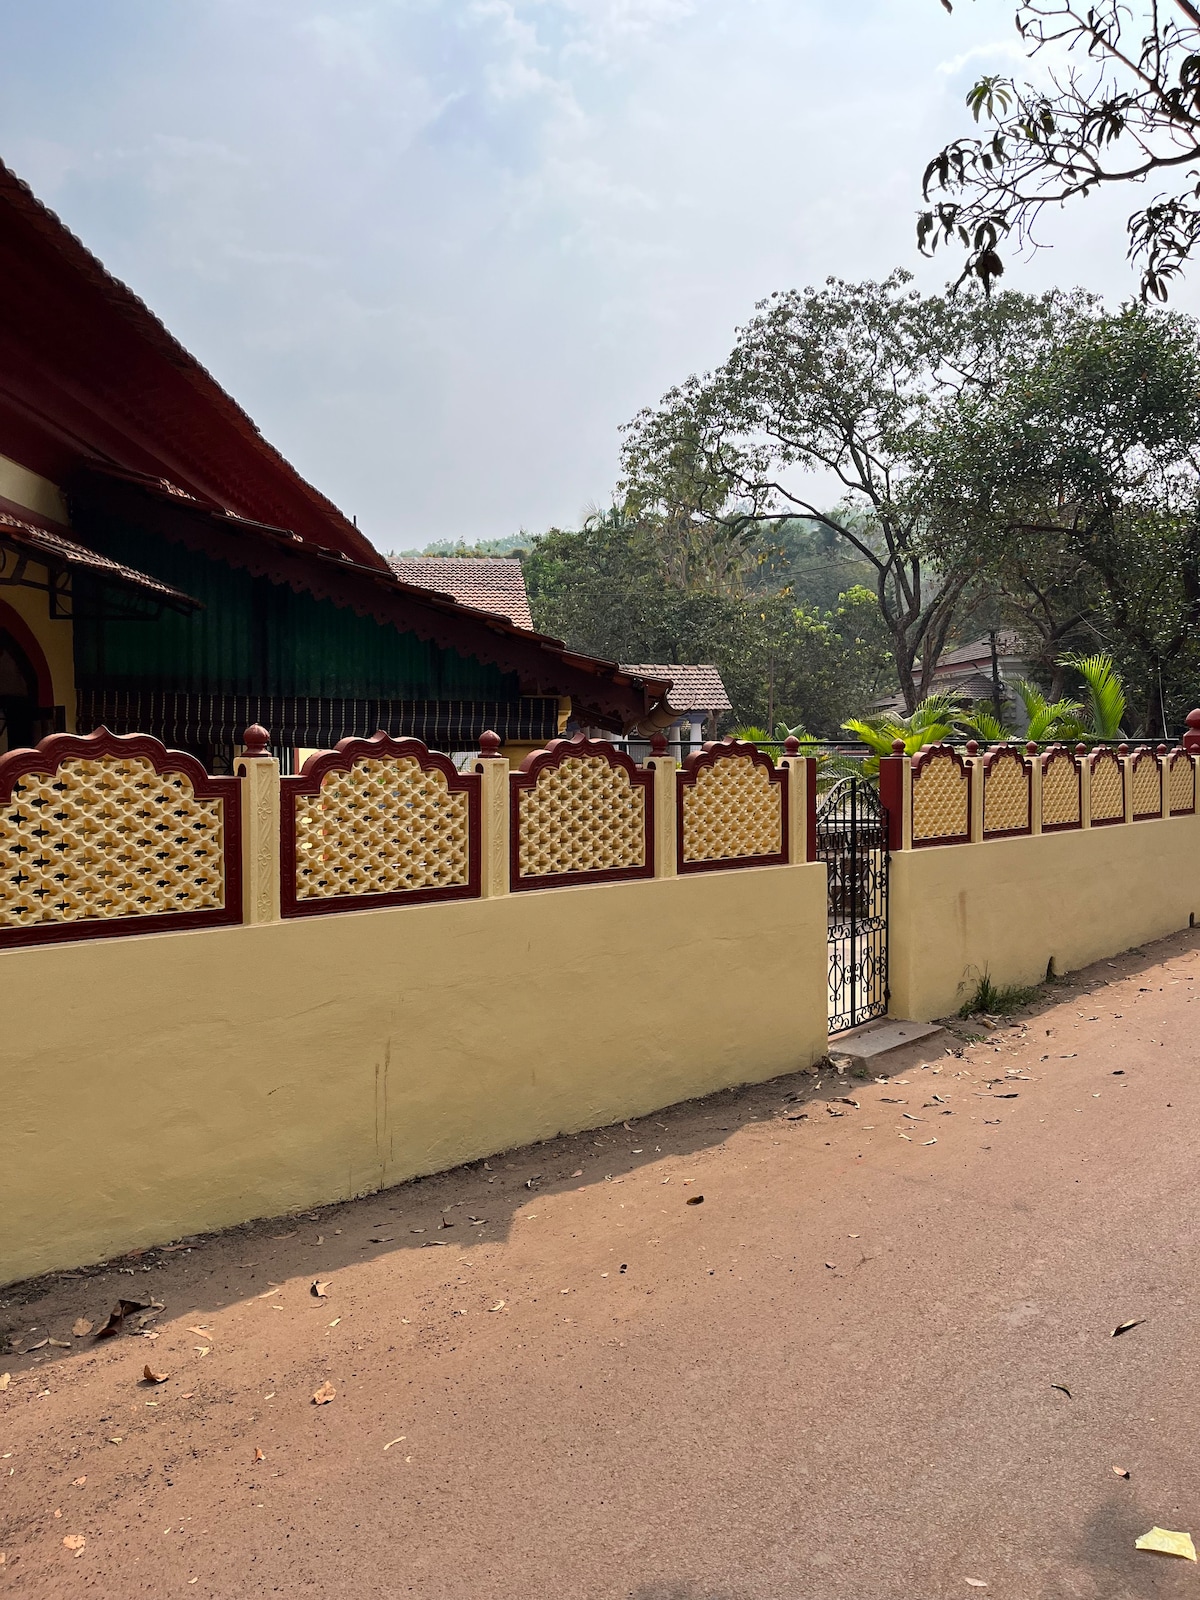 Well-maintained 120-year old Goan home in village